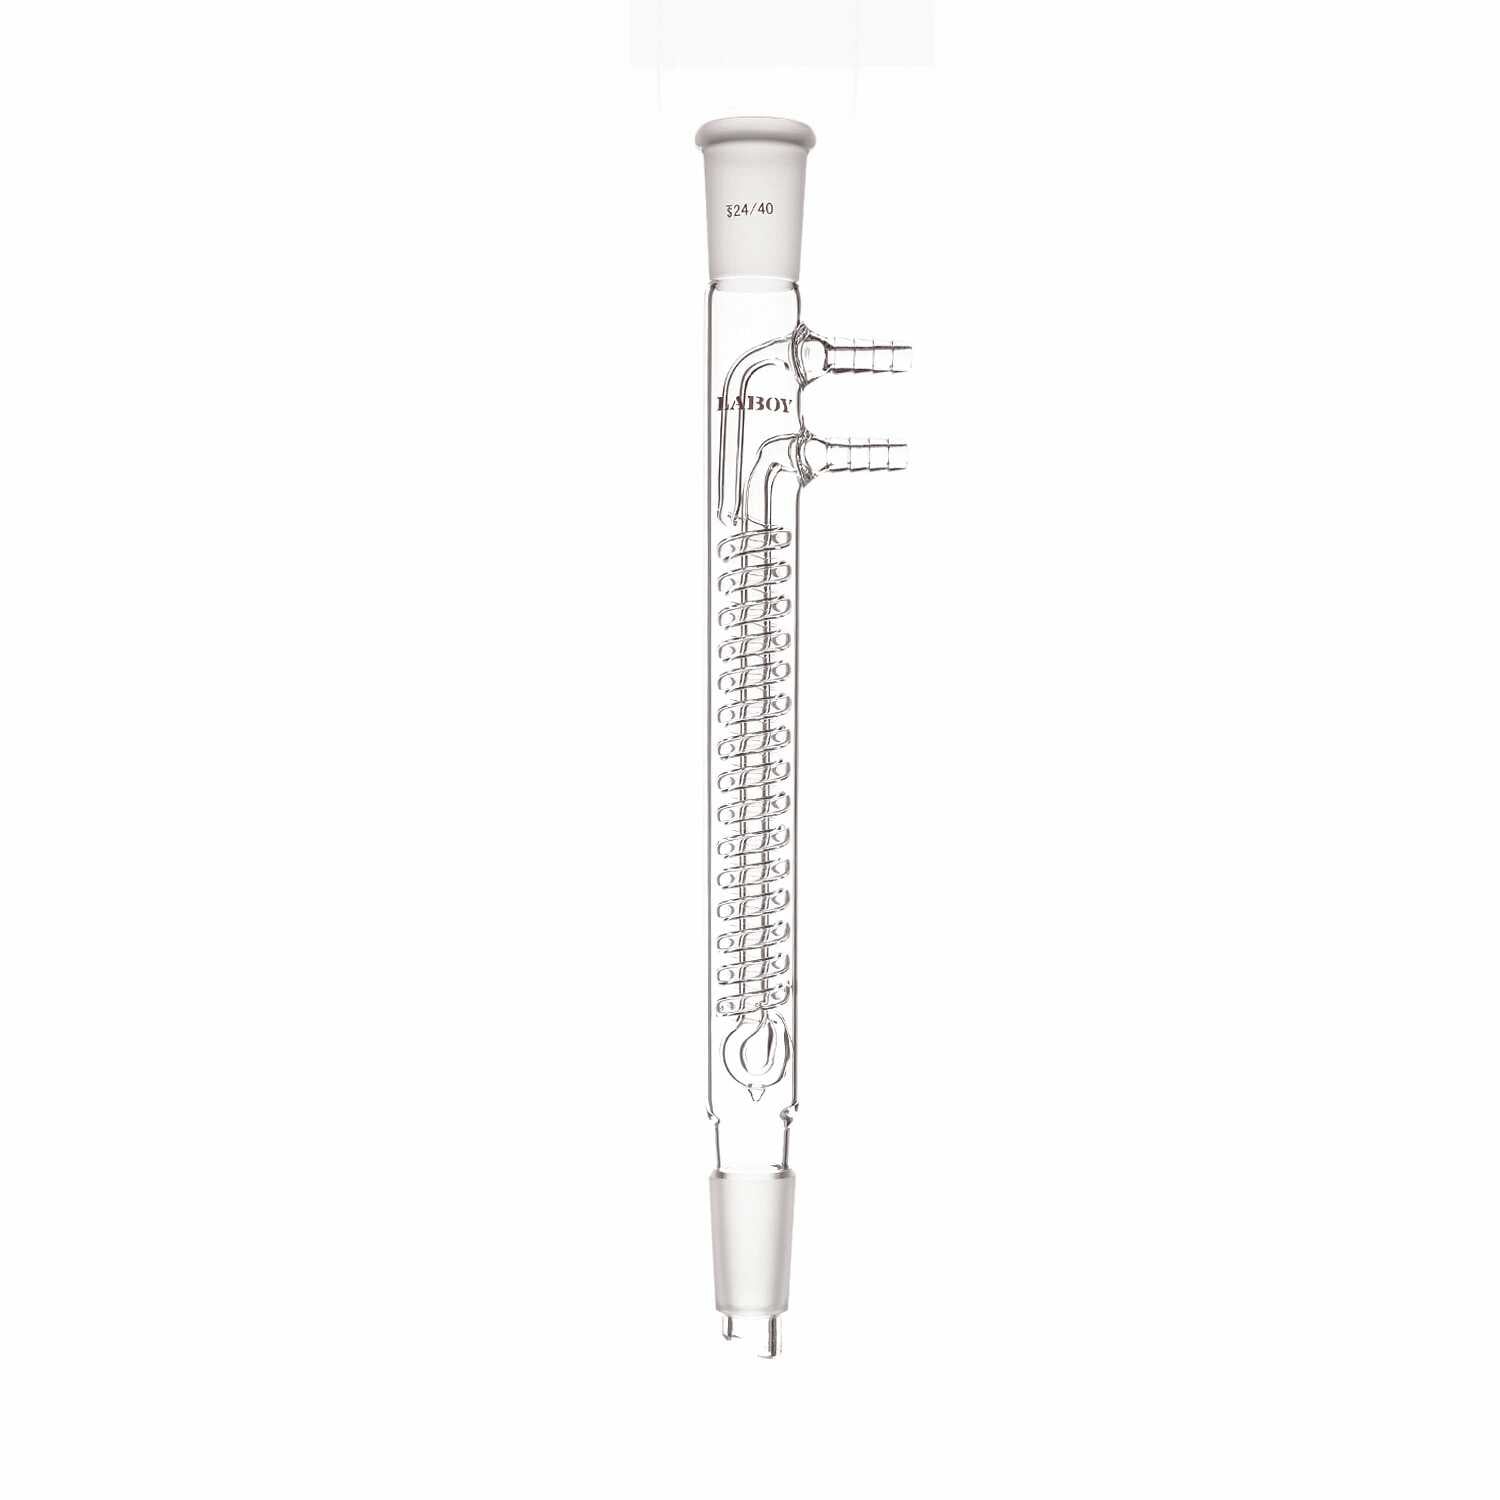 Reflux Condenser 110mm In Coil Length With 14/20 Glass Joints